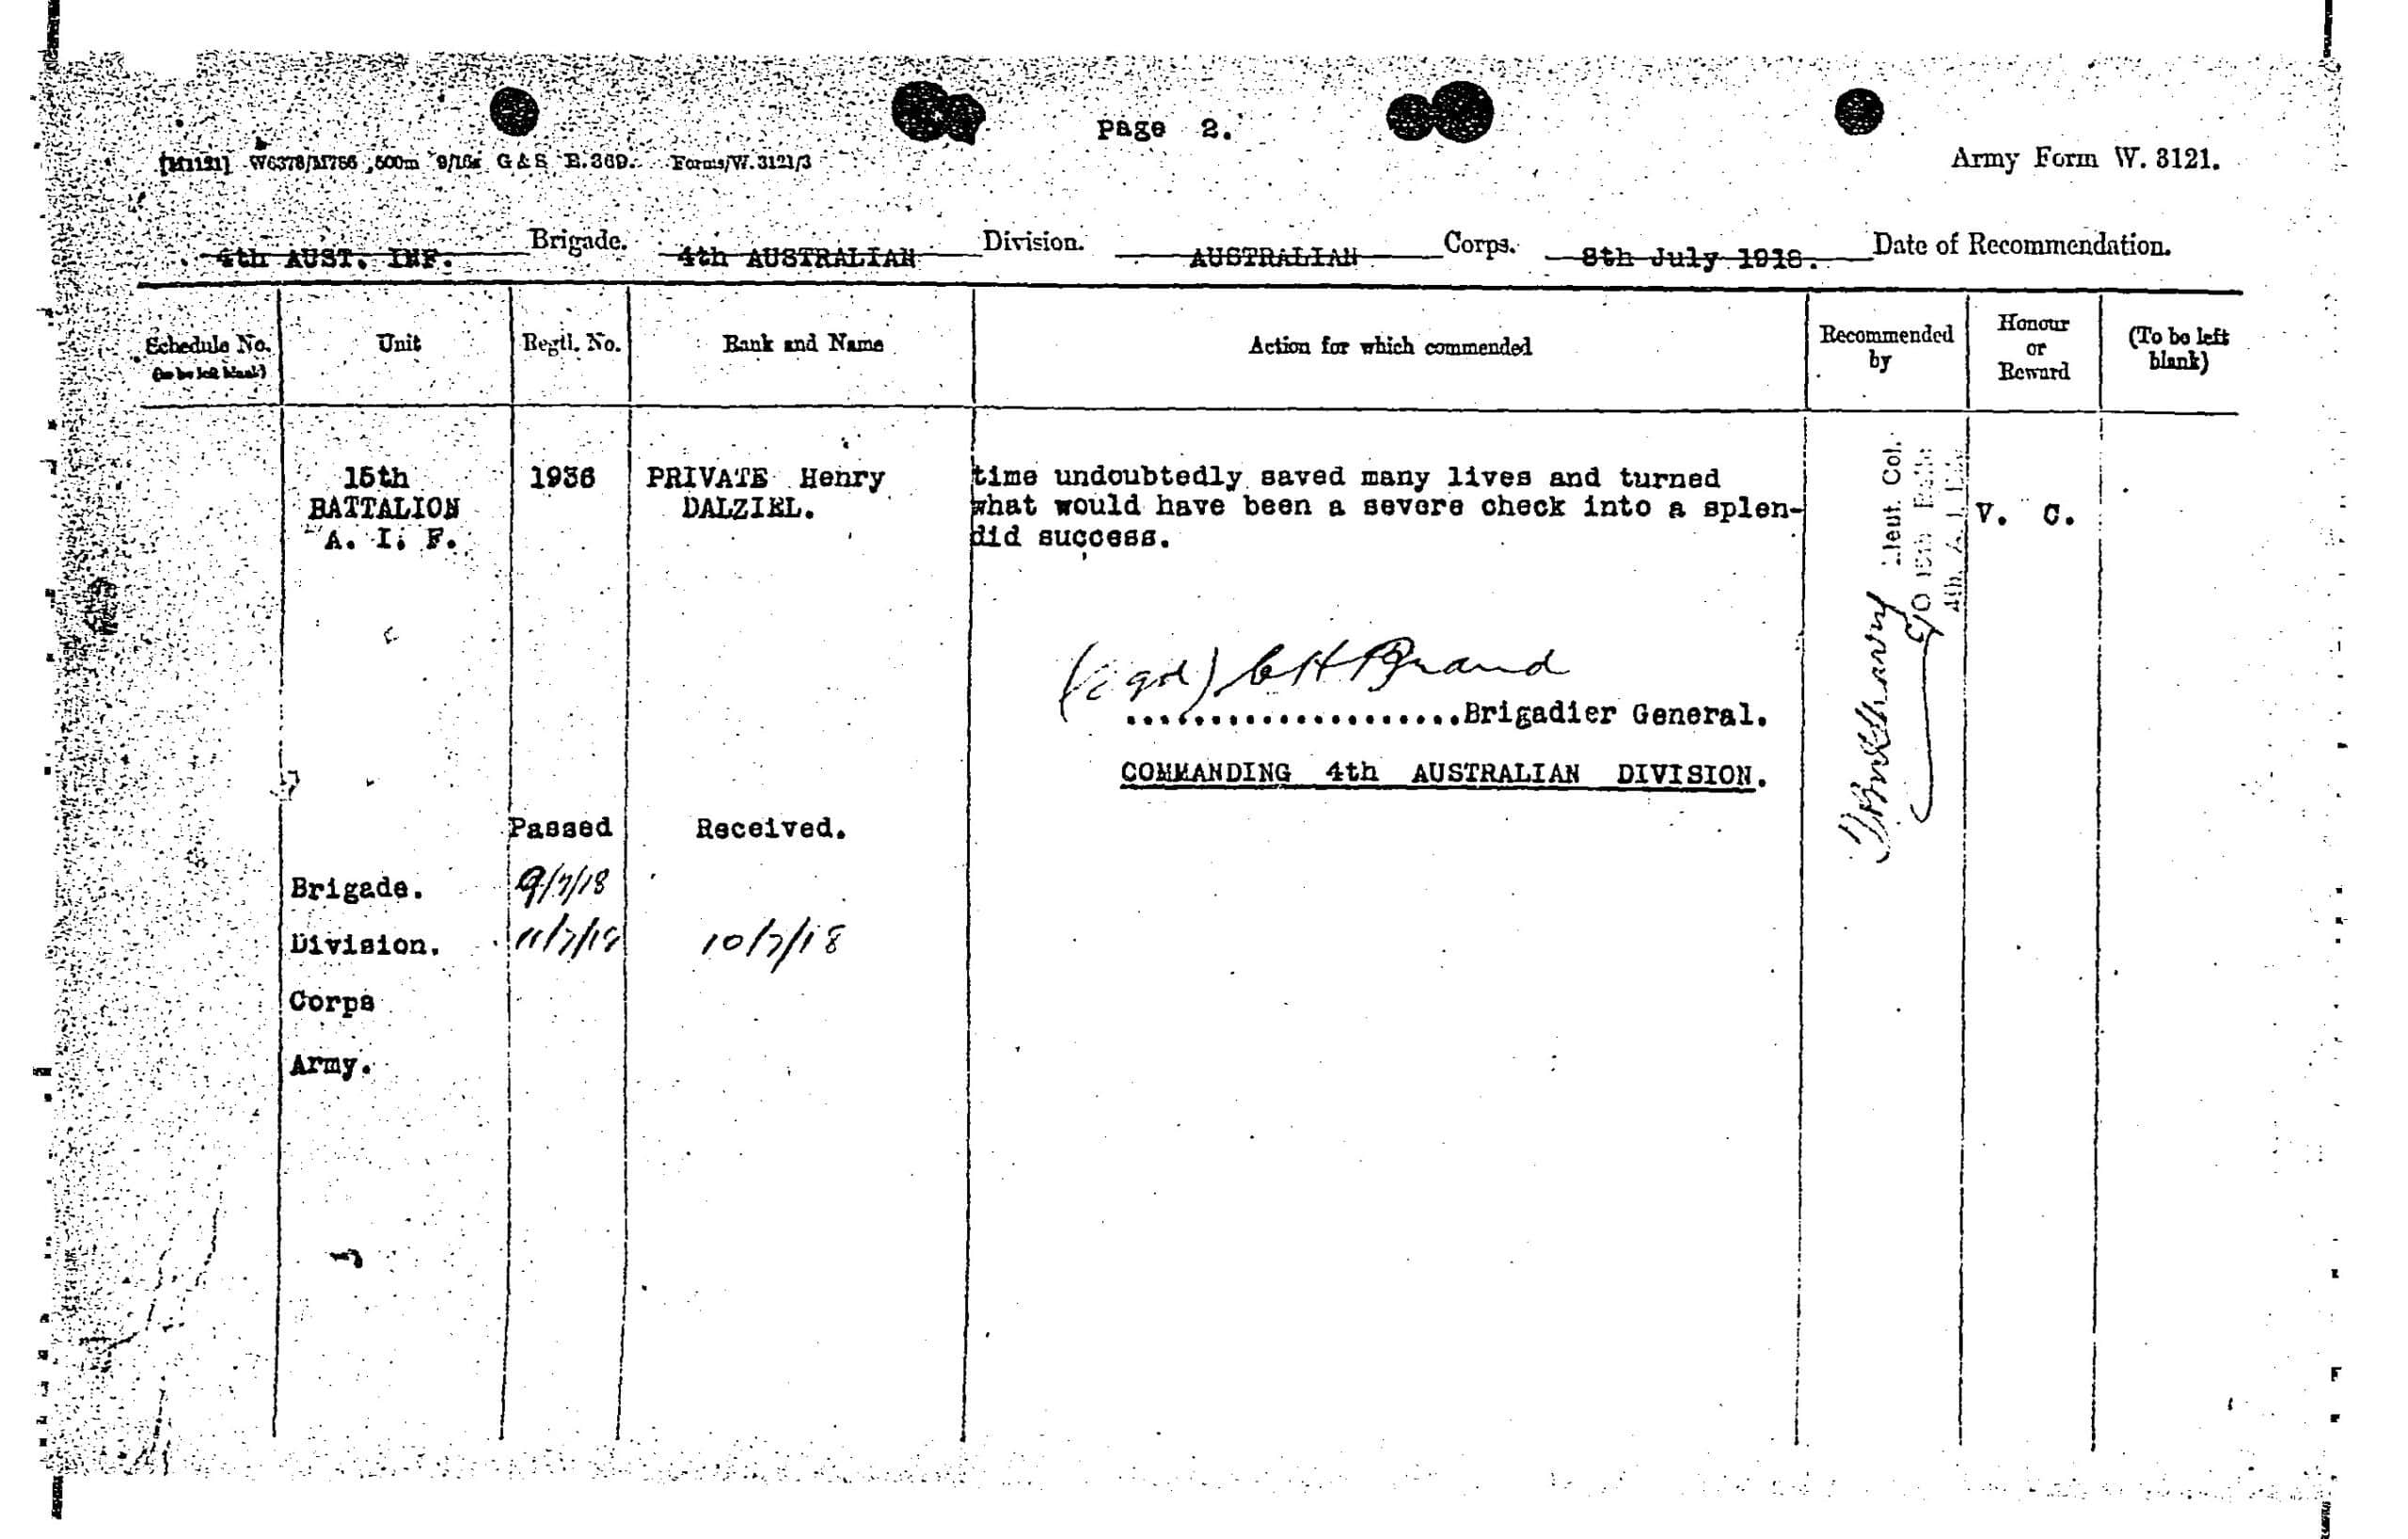 Record of Henry Dalziel from the MyHeritage Military Honour Recommendations and Awards